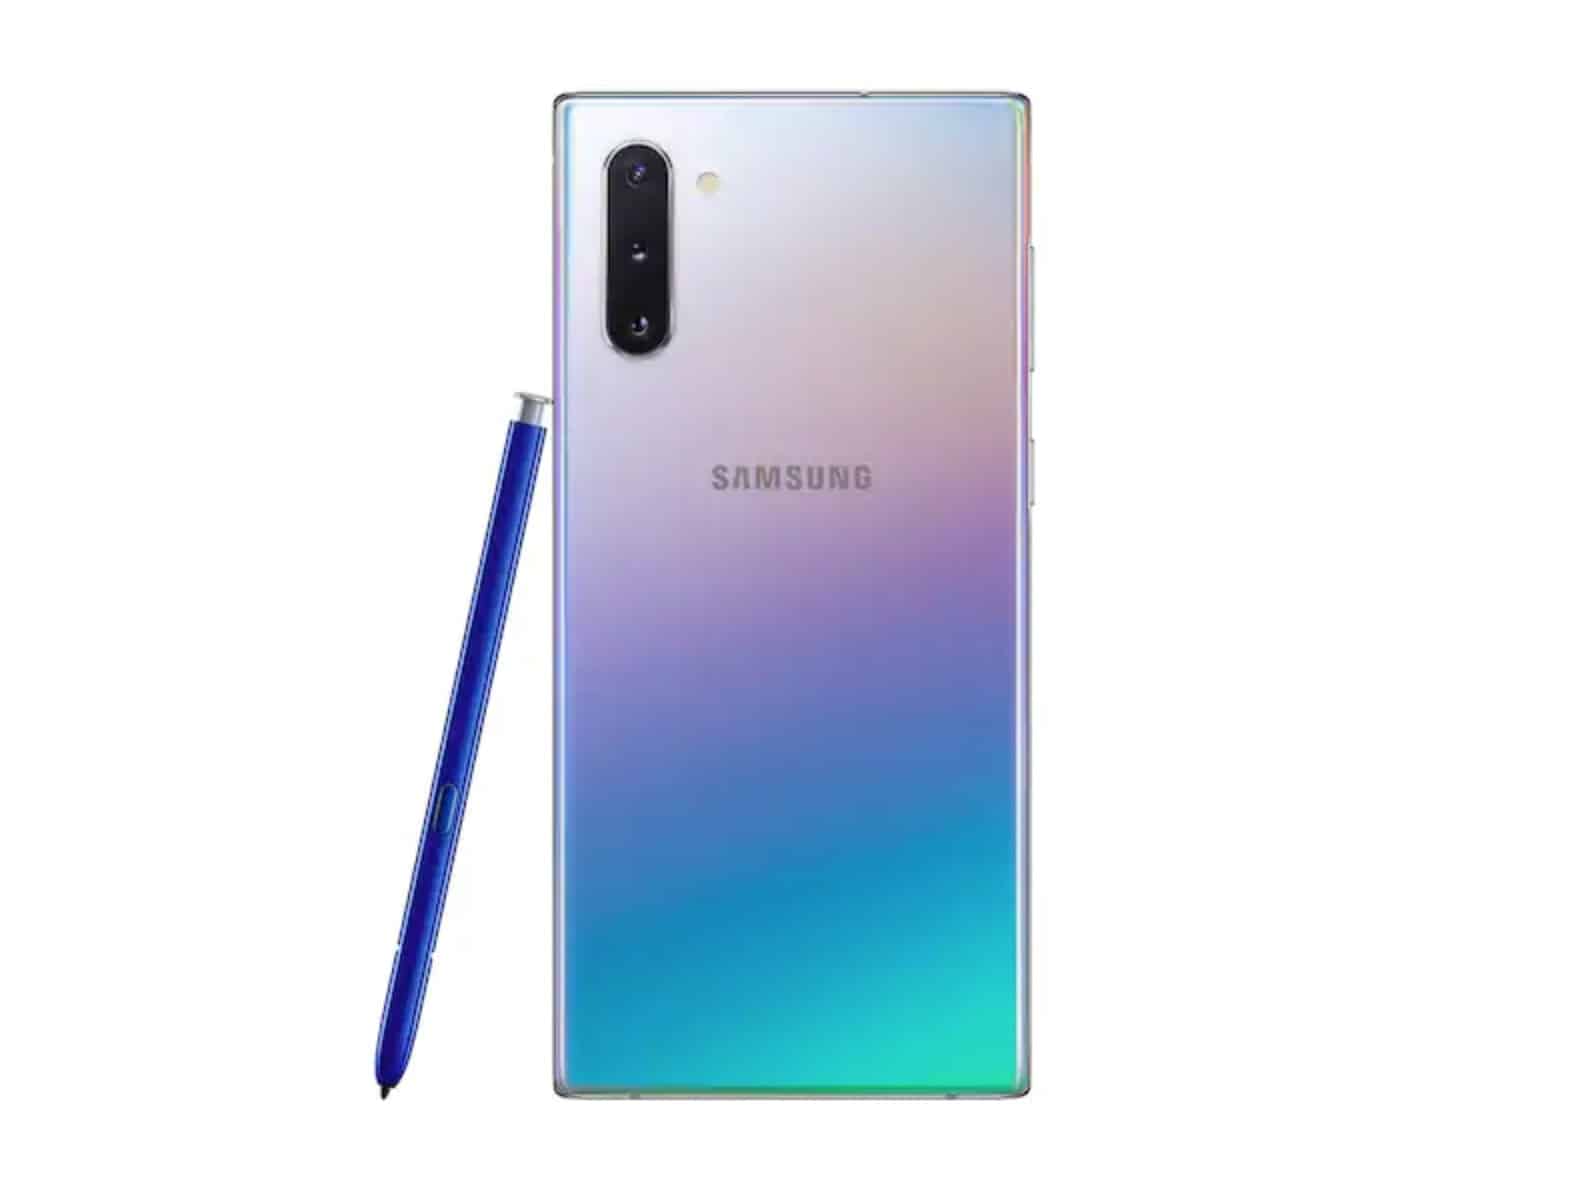 The new Galaxy Note 10 in the Aura Glow color. Apparently, iridescent is a big thing with the kids right now.